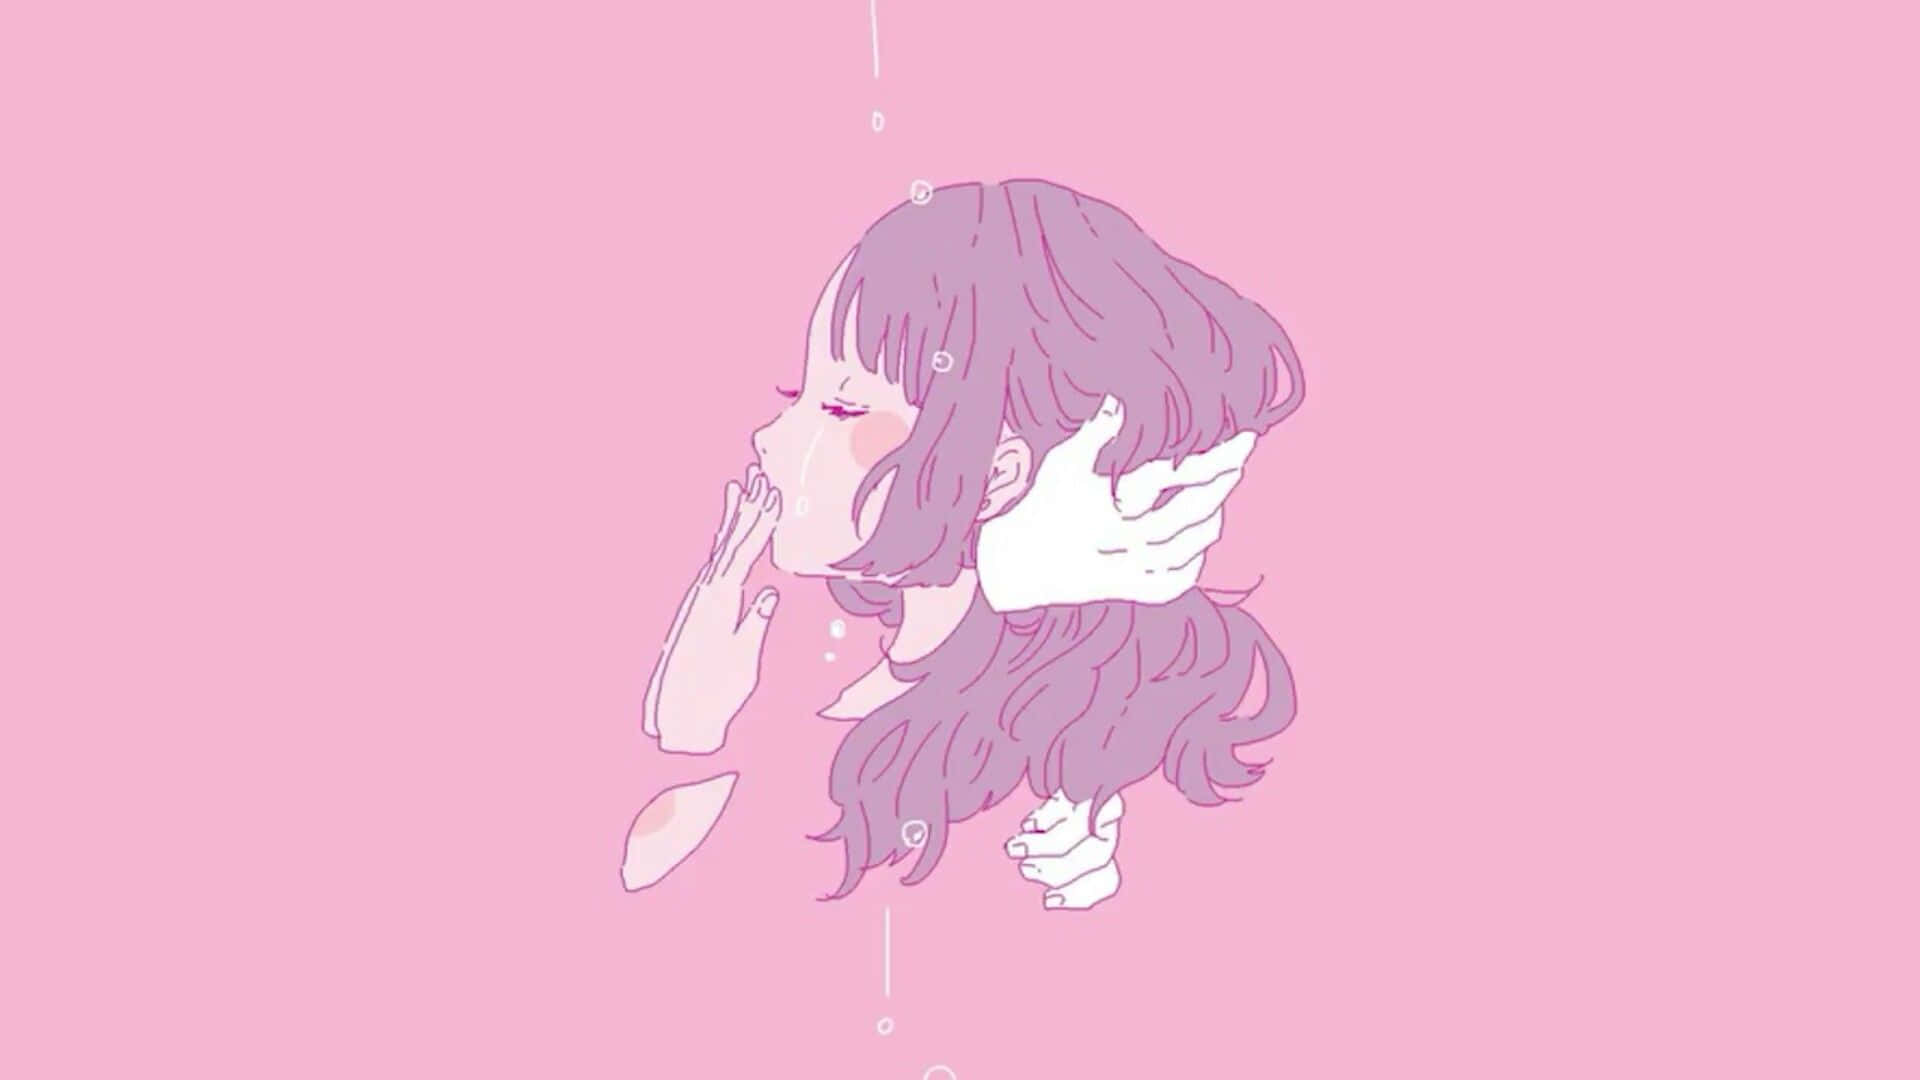 Girly Aesthetic Crying In Pink Wallpaper